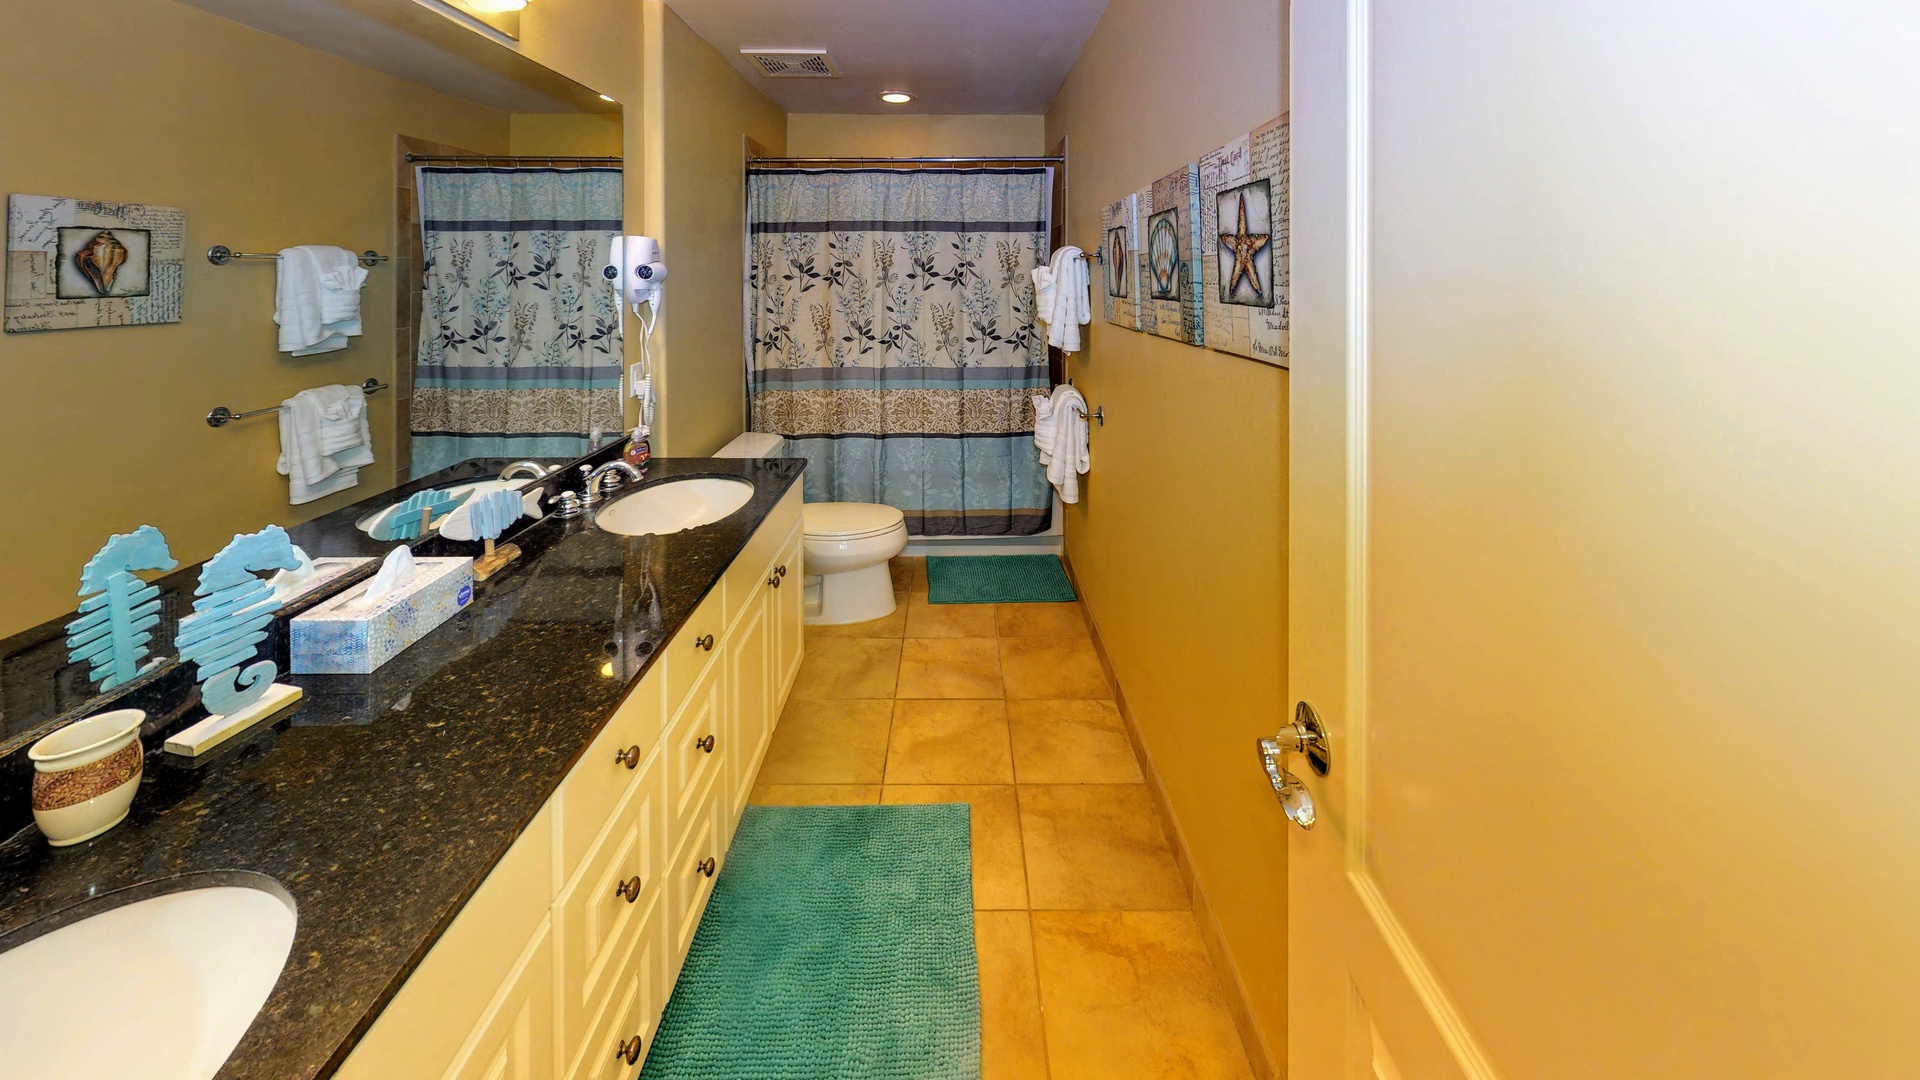 Kapolei Vacation Rentals, Ko Olina Kai 1029B - The primary guest bathroom with a large vanity and shower.